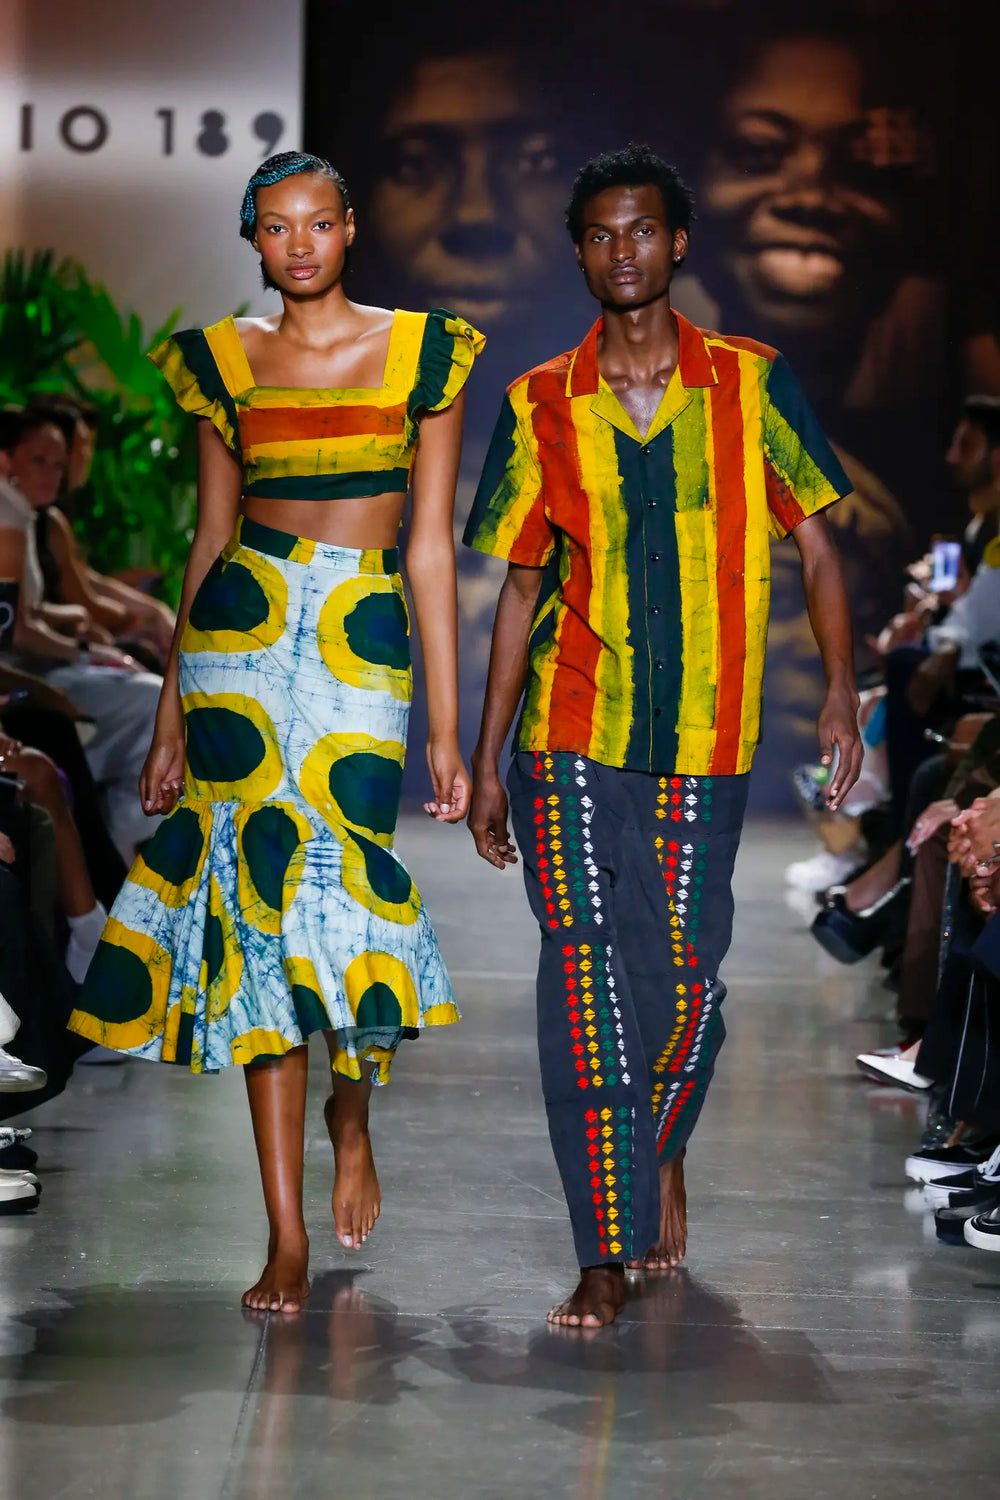 Ghana, Fashion, ​Africa, diaspora, cotton, dresses​, GOWNS, skirts, shirts, tops, womenswear, womens, Handmade, bag, West Africa, Gift, travel, vacation, beach, picnic, pool, swim, sand, family, trip, luxury, resort, spring, summer​, ​concert, gala, event, party, brunch, chic, ​custom, bespoke, plus-sized, extended sizes, inclusivity, celebration, special, cotton, packable, luxury, accessible, new, novelty, classic